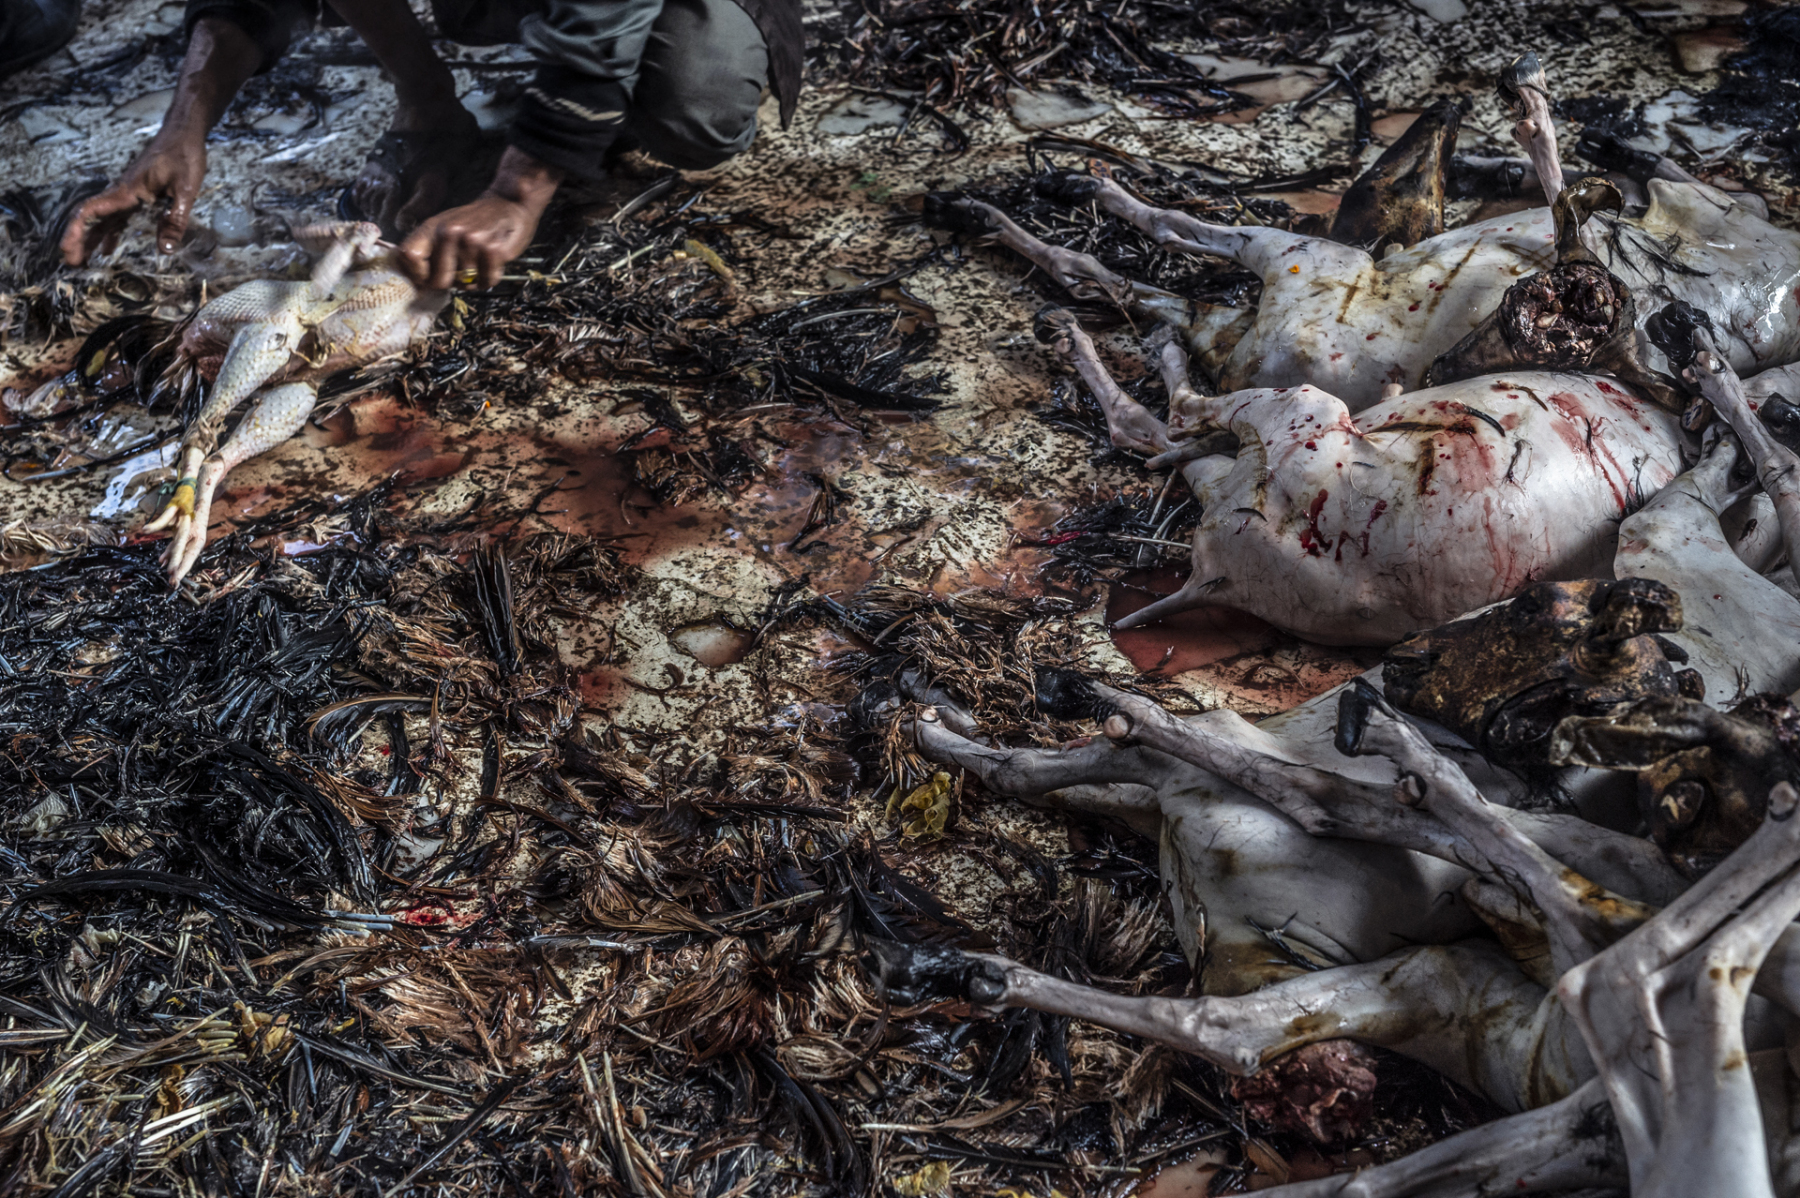 Animals killed in sacrifice are plucked, dehaired, dismembered and boiled at Dakshinkali temple. Nepal. Jo-Anne McArthur